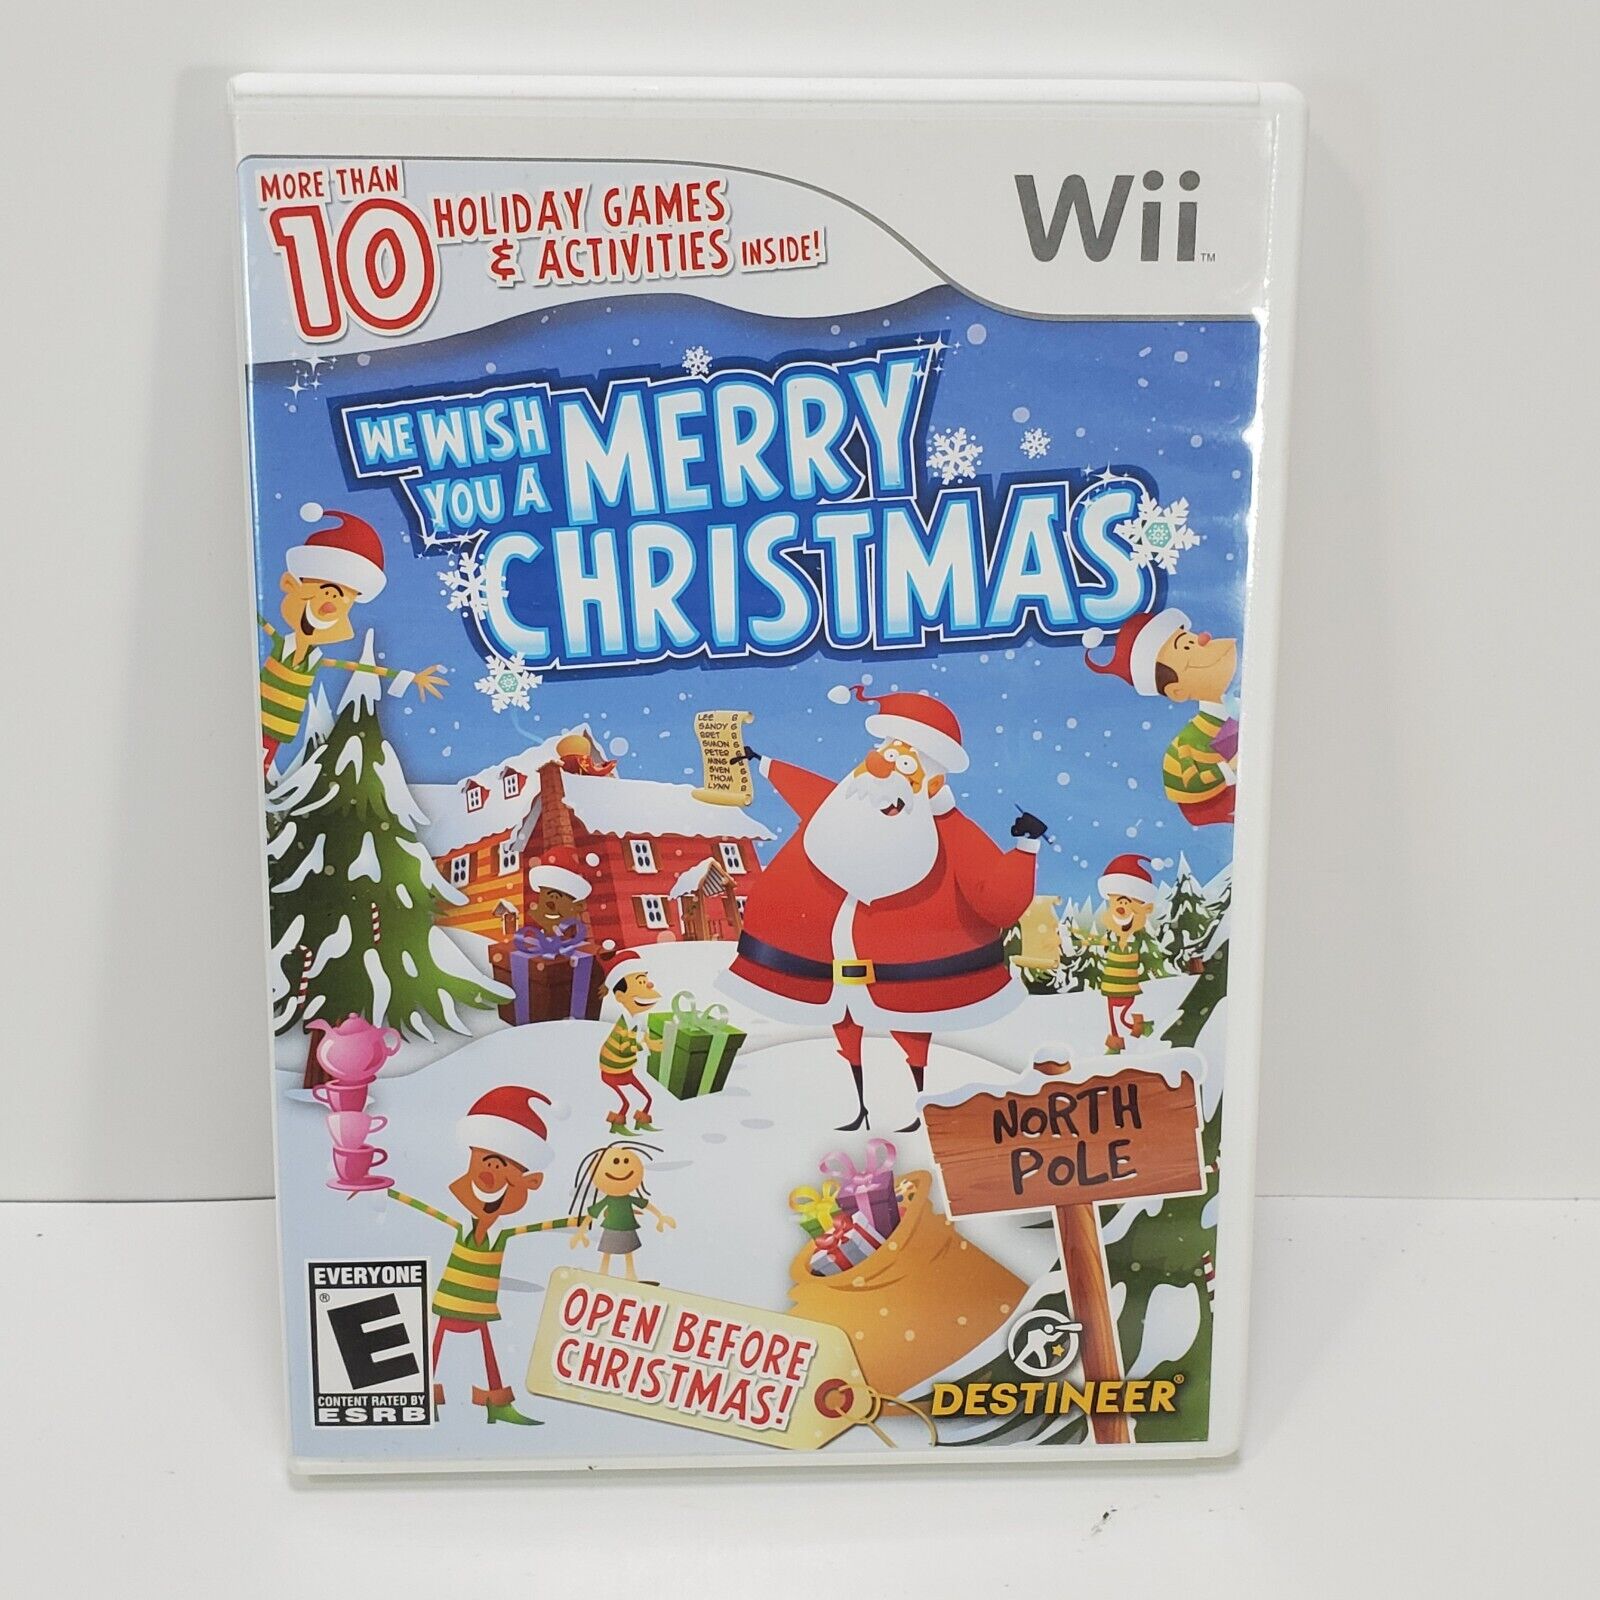 Algebra koffie Gouverneur We Wish You a Merry Christmas Nintendo Wii Complete Fast Free Shipping  828068212919 | eBay